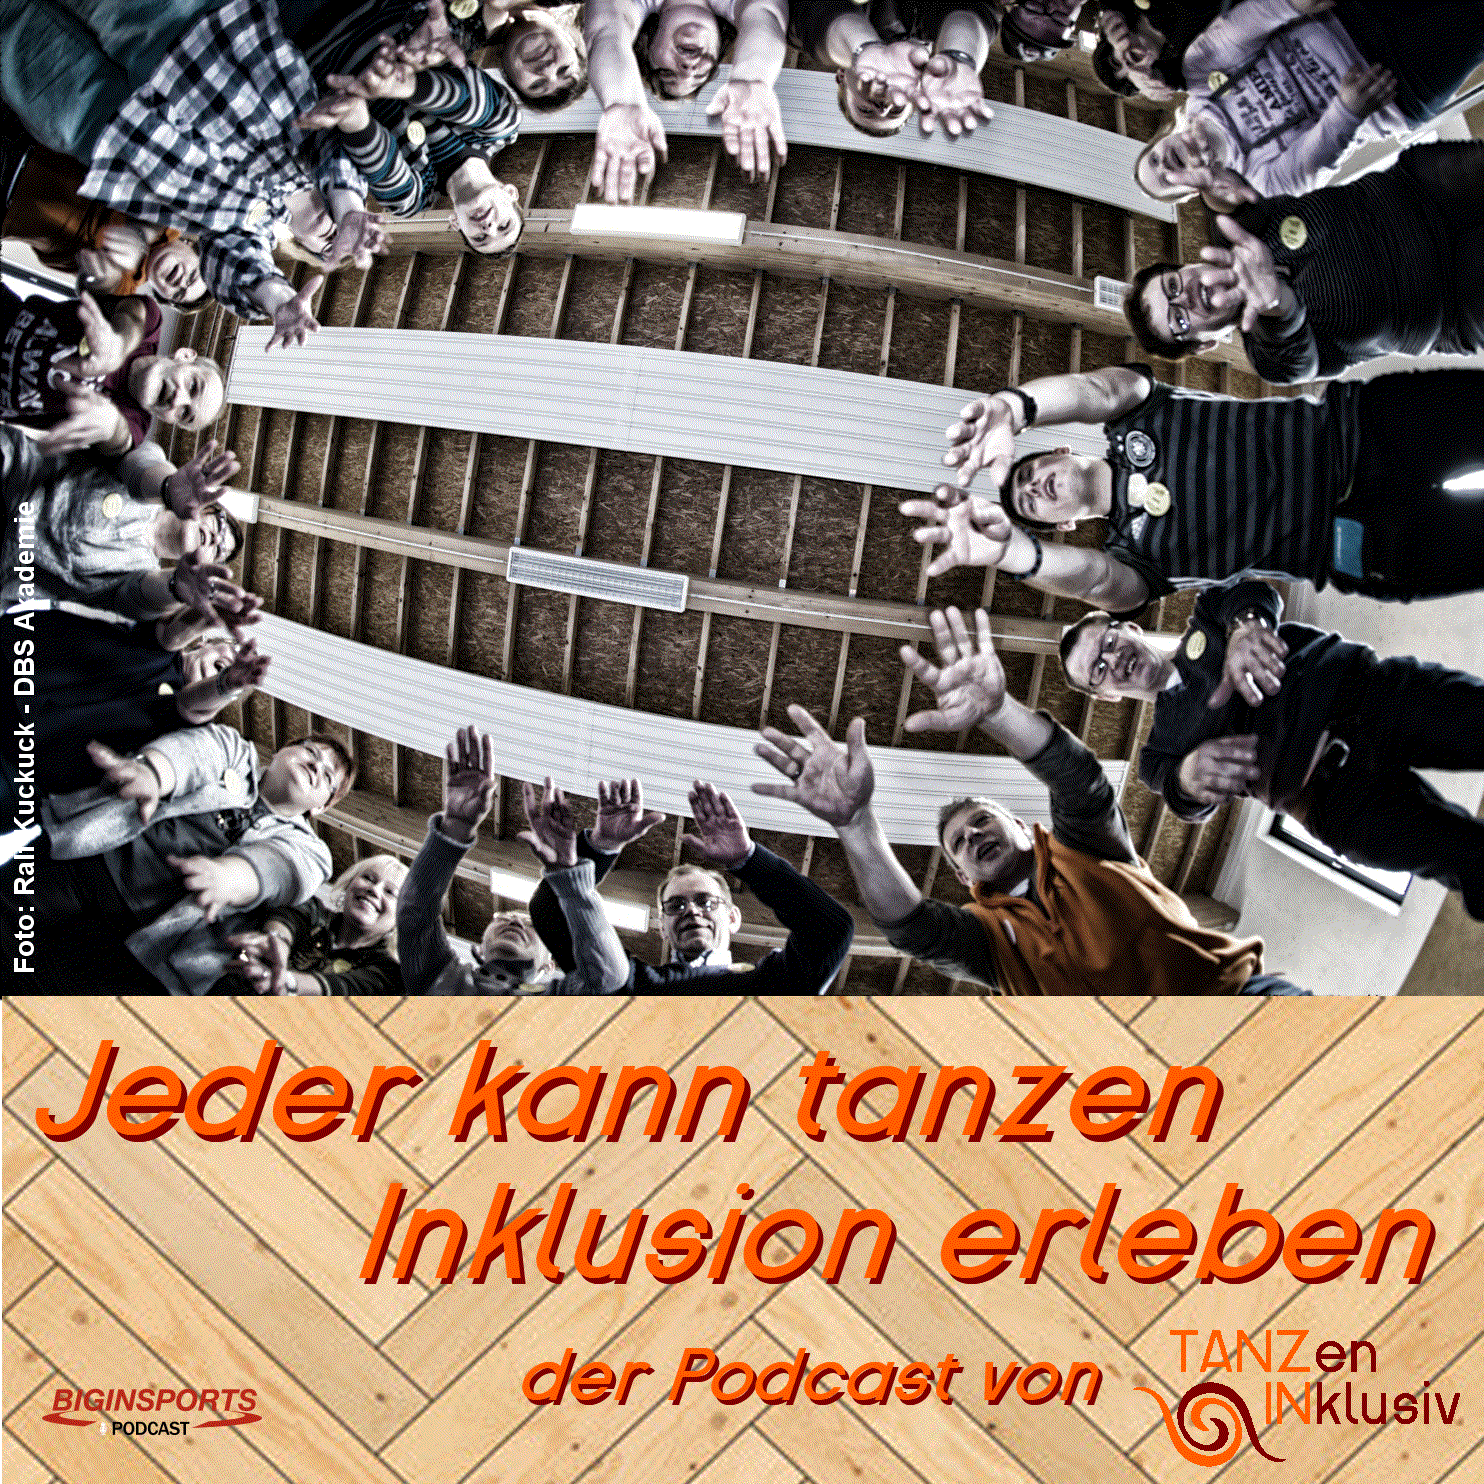 You are currently viewing Jeder kann tanzen Podcast – Neue Folge online!